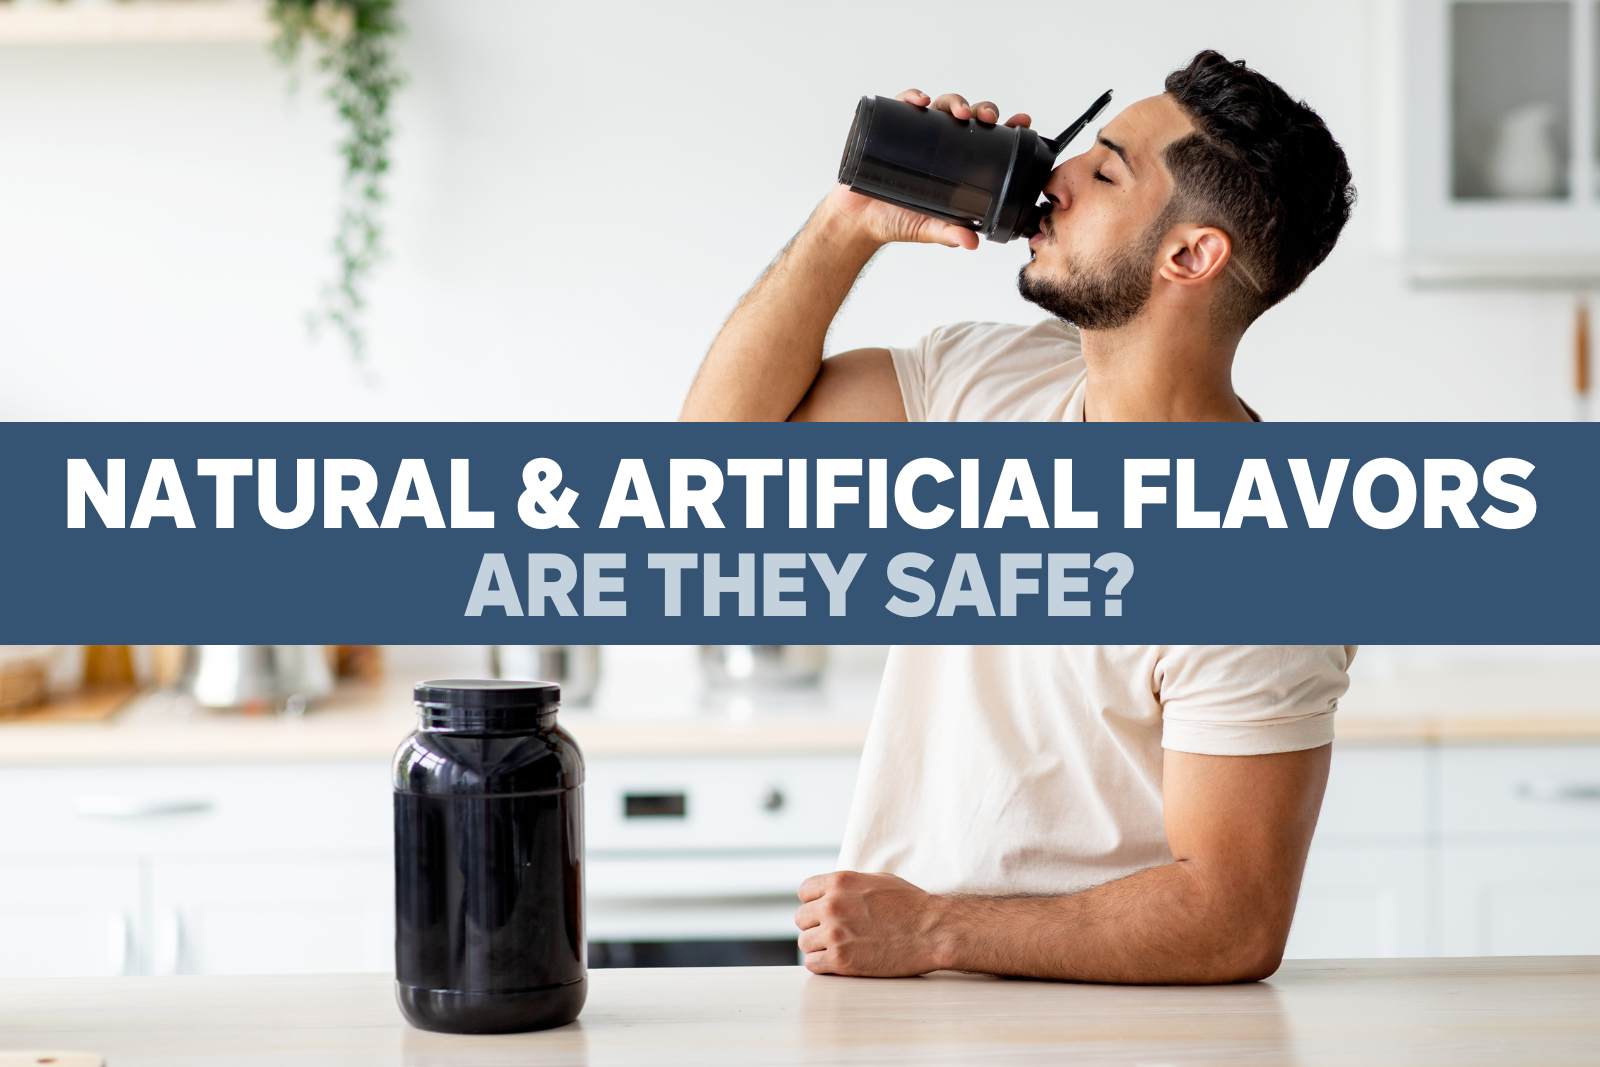 Natural & Artificial Flavors: Are They Safe?